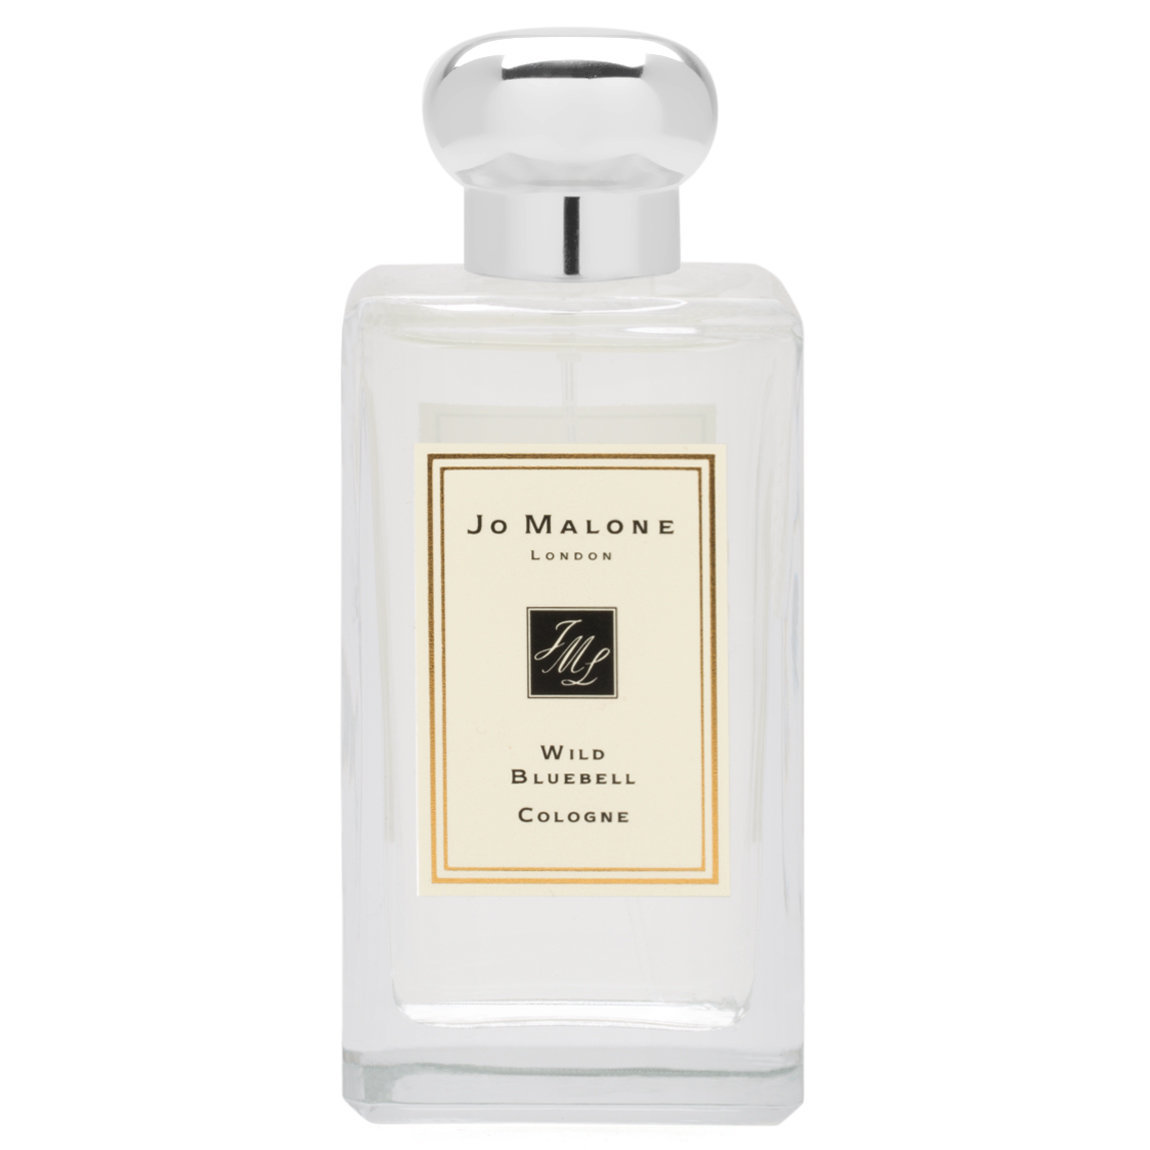 Jo Malone London Wild Bluebell Cologne  100 ml alternative view 1 - product swatch.